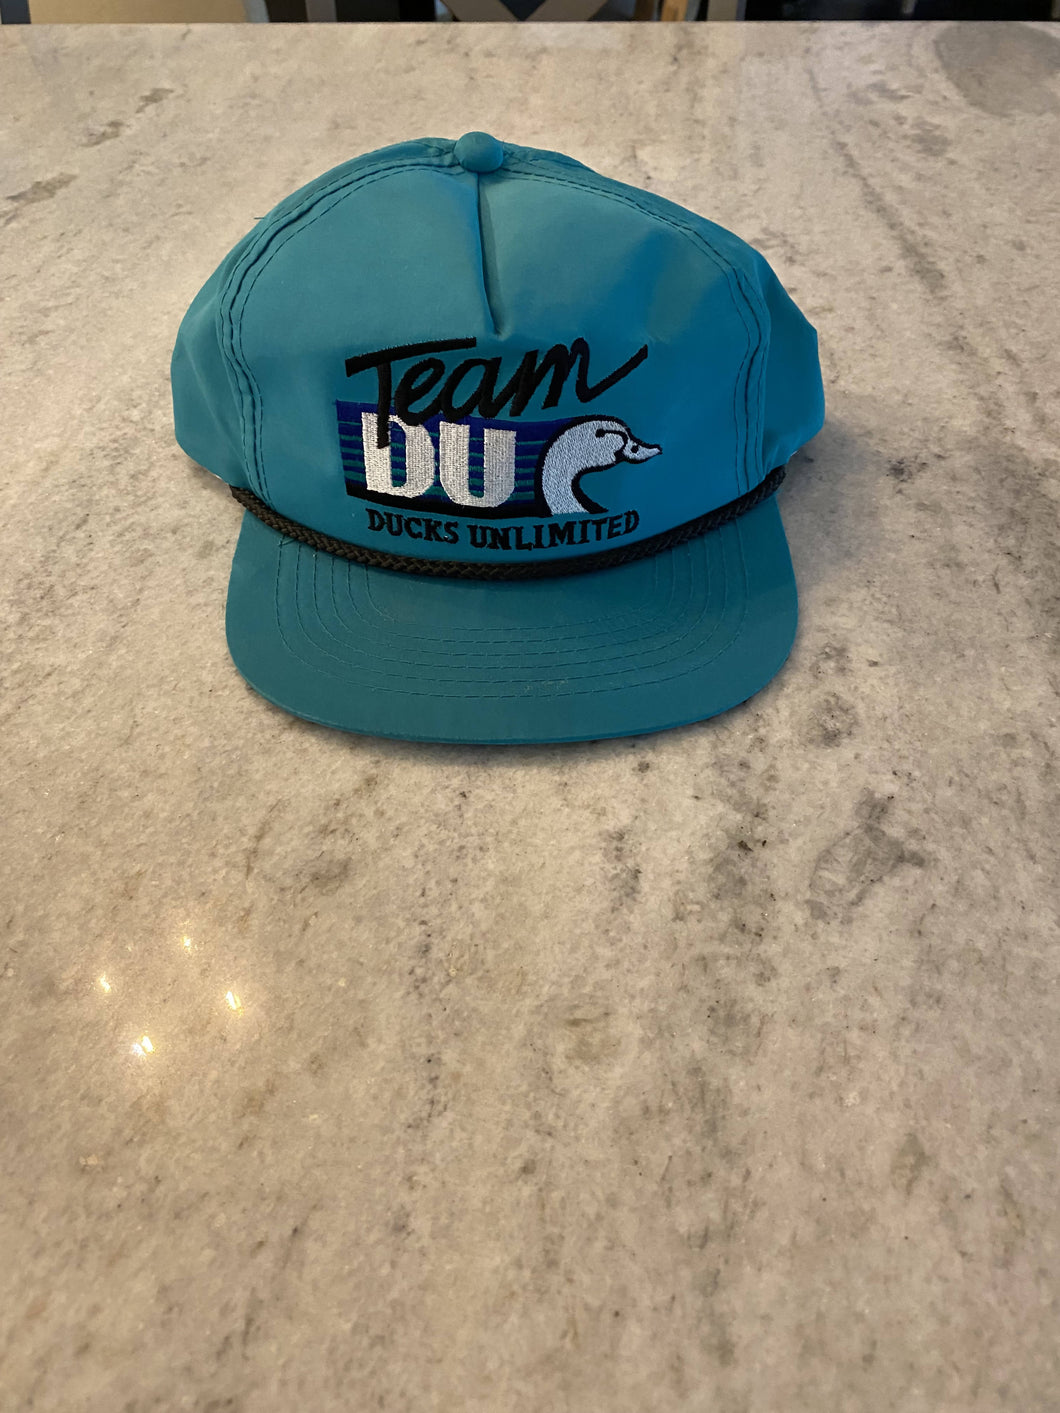 Ducks Unlimited Turquoise Dry Fit Hat